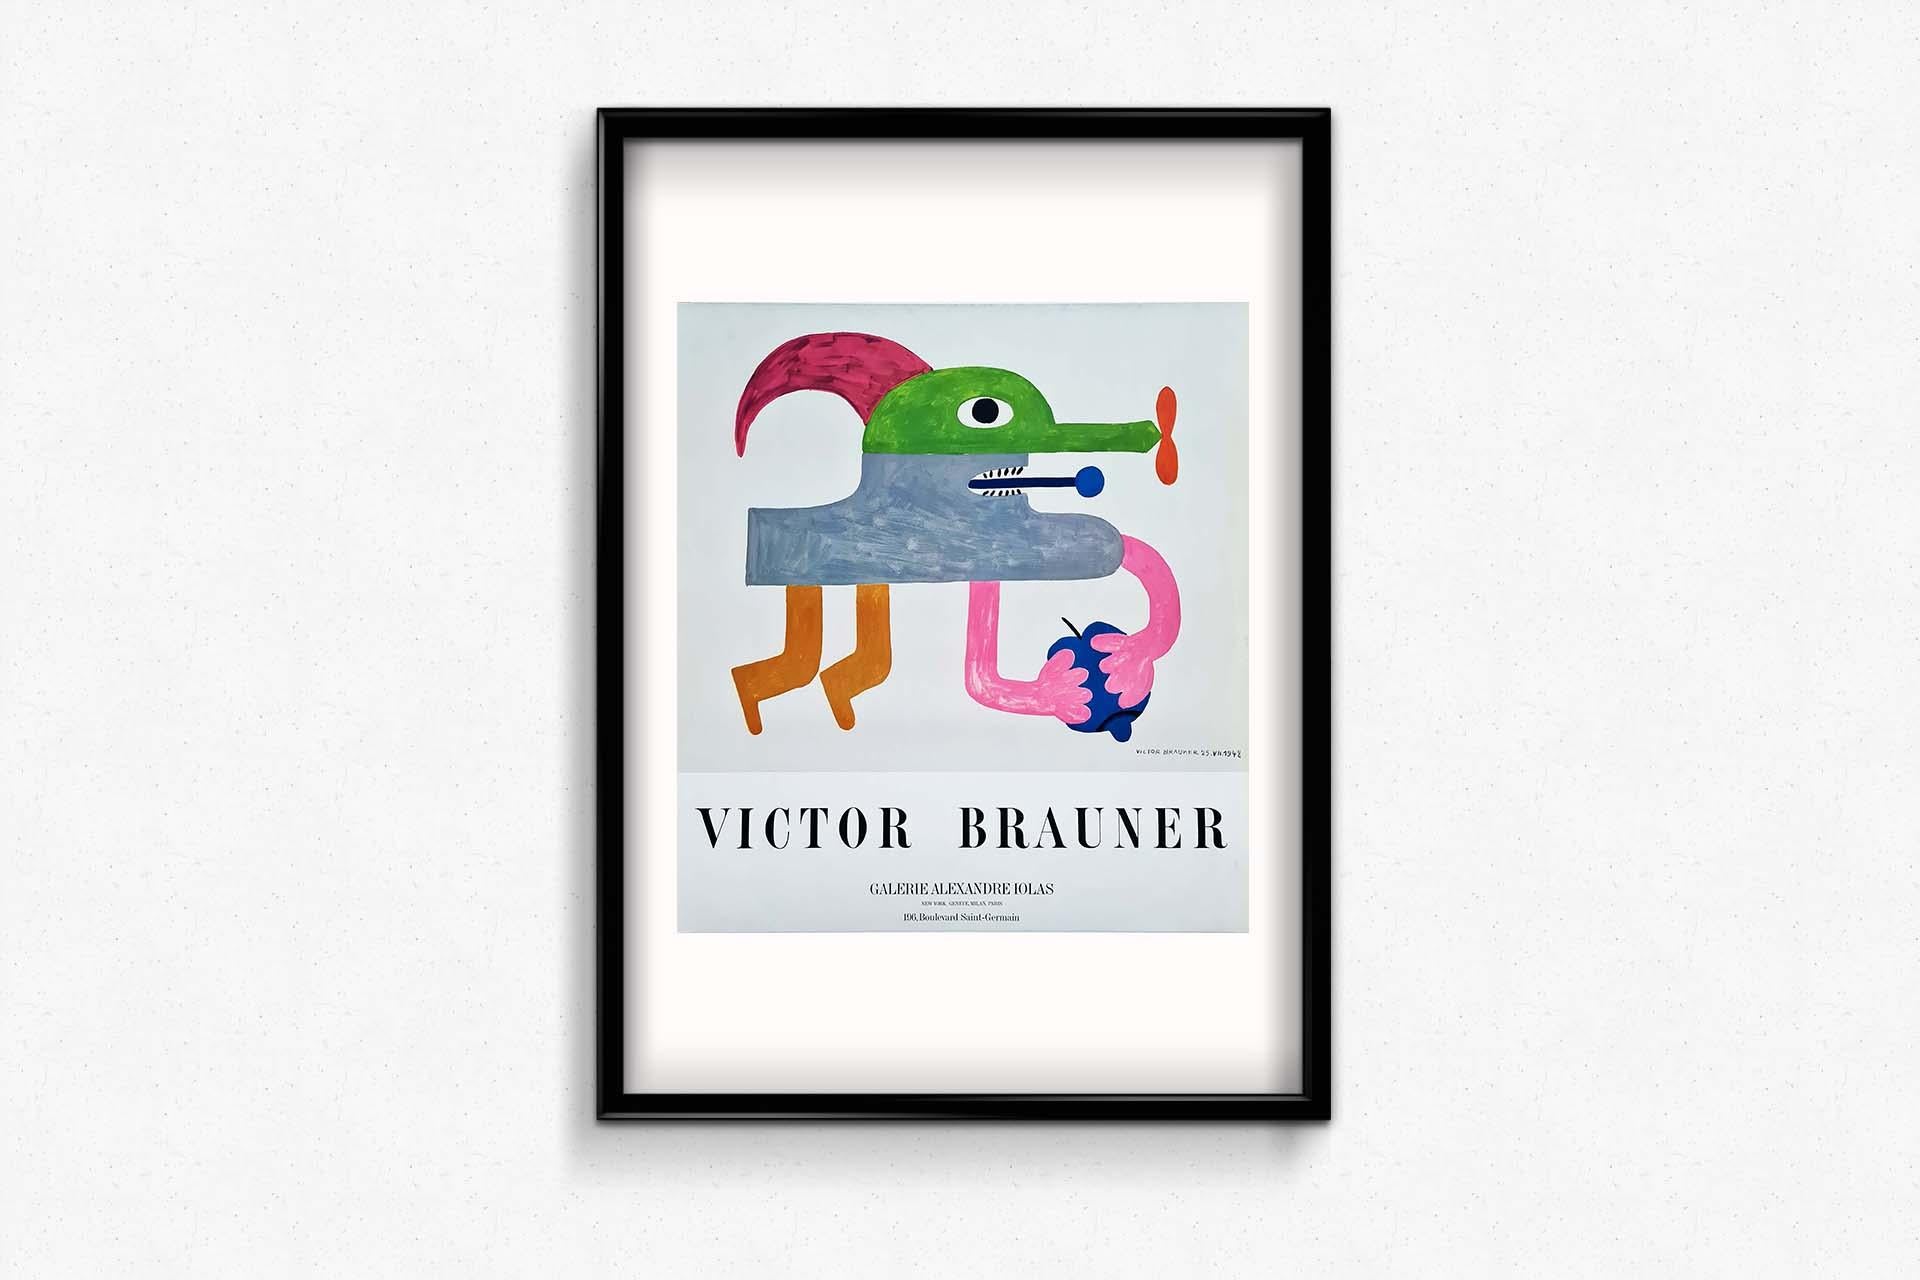 Beautiful poster of Victor Brauner in the 60s for an exhibition at the Galerie Alexandre Iolas in Paris. Victor Brauner was a Romanian painter and sculptor of the surrealist movement.

Exhibition - Abstract

Gallery Alexandre Iolas Paris